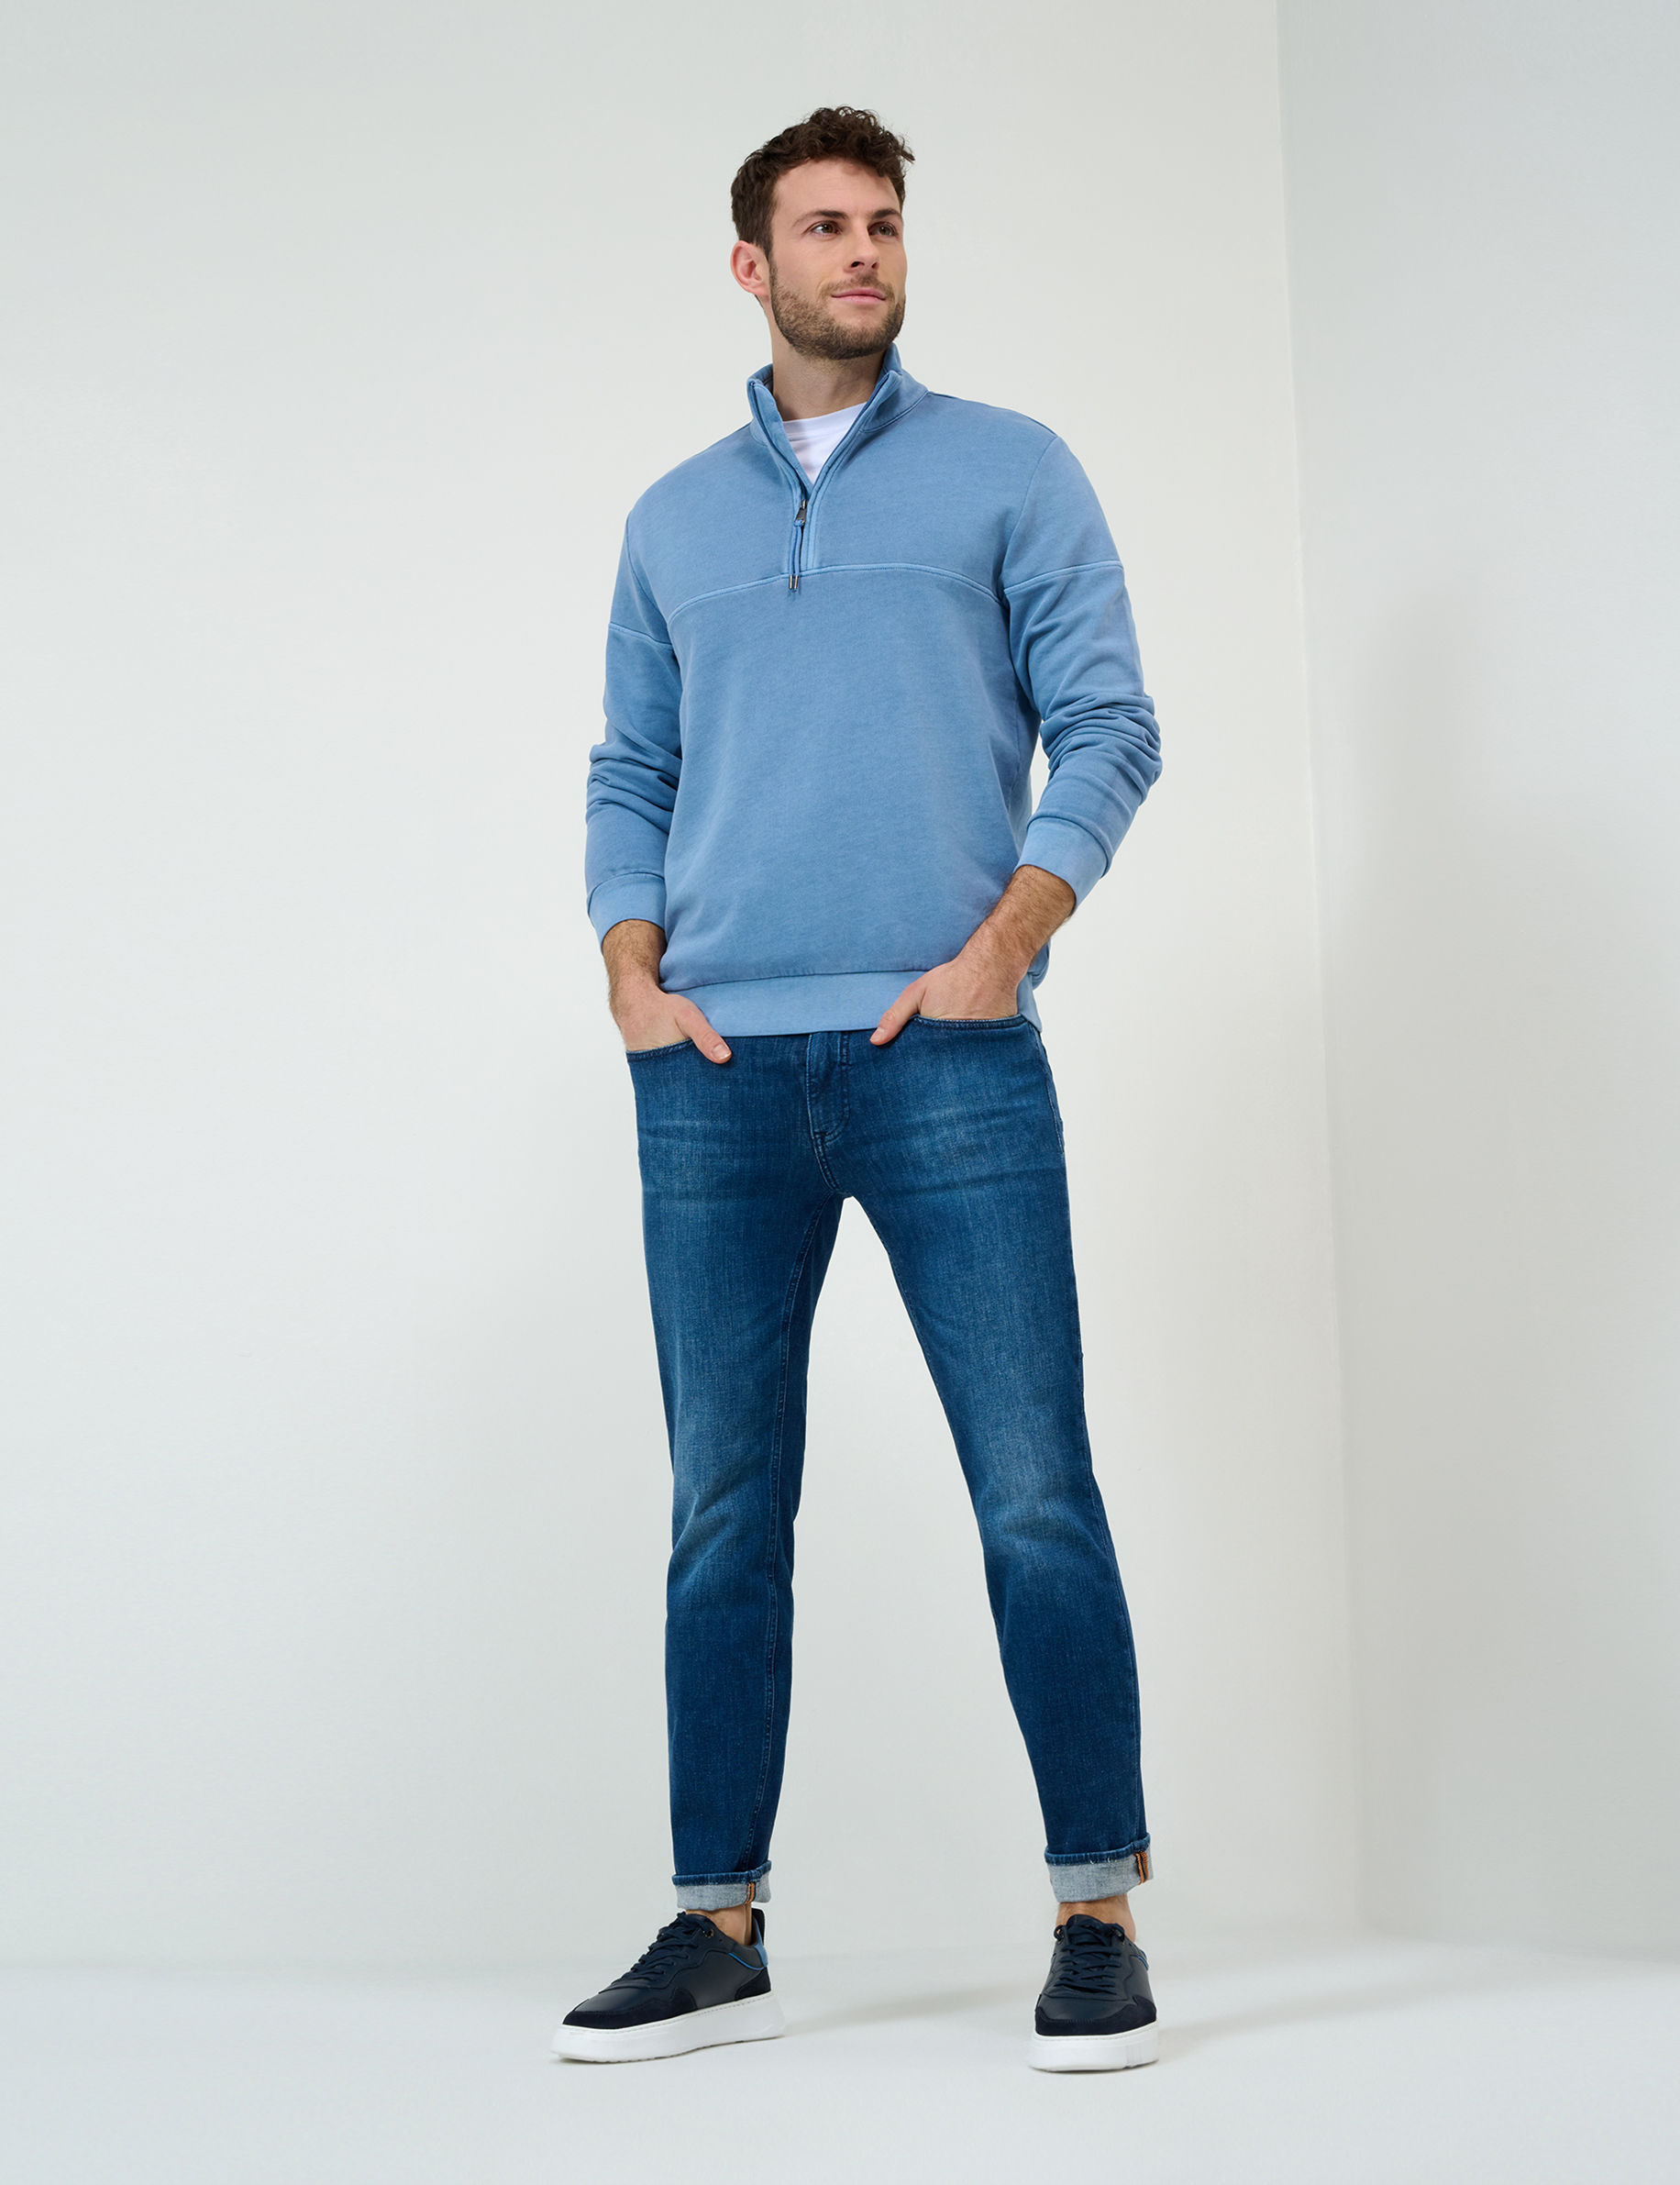 Men Style SION dusty blue  Model Outfit